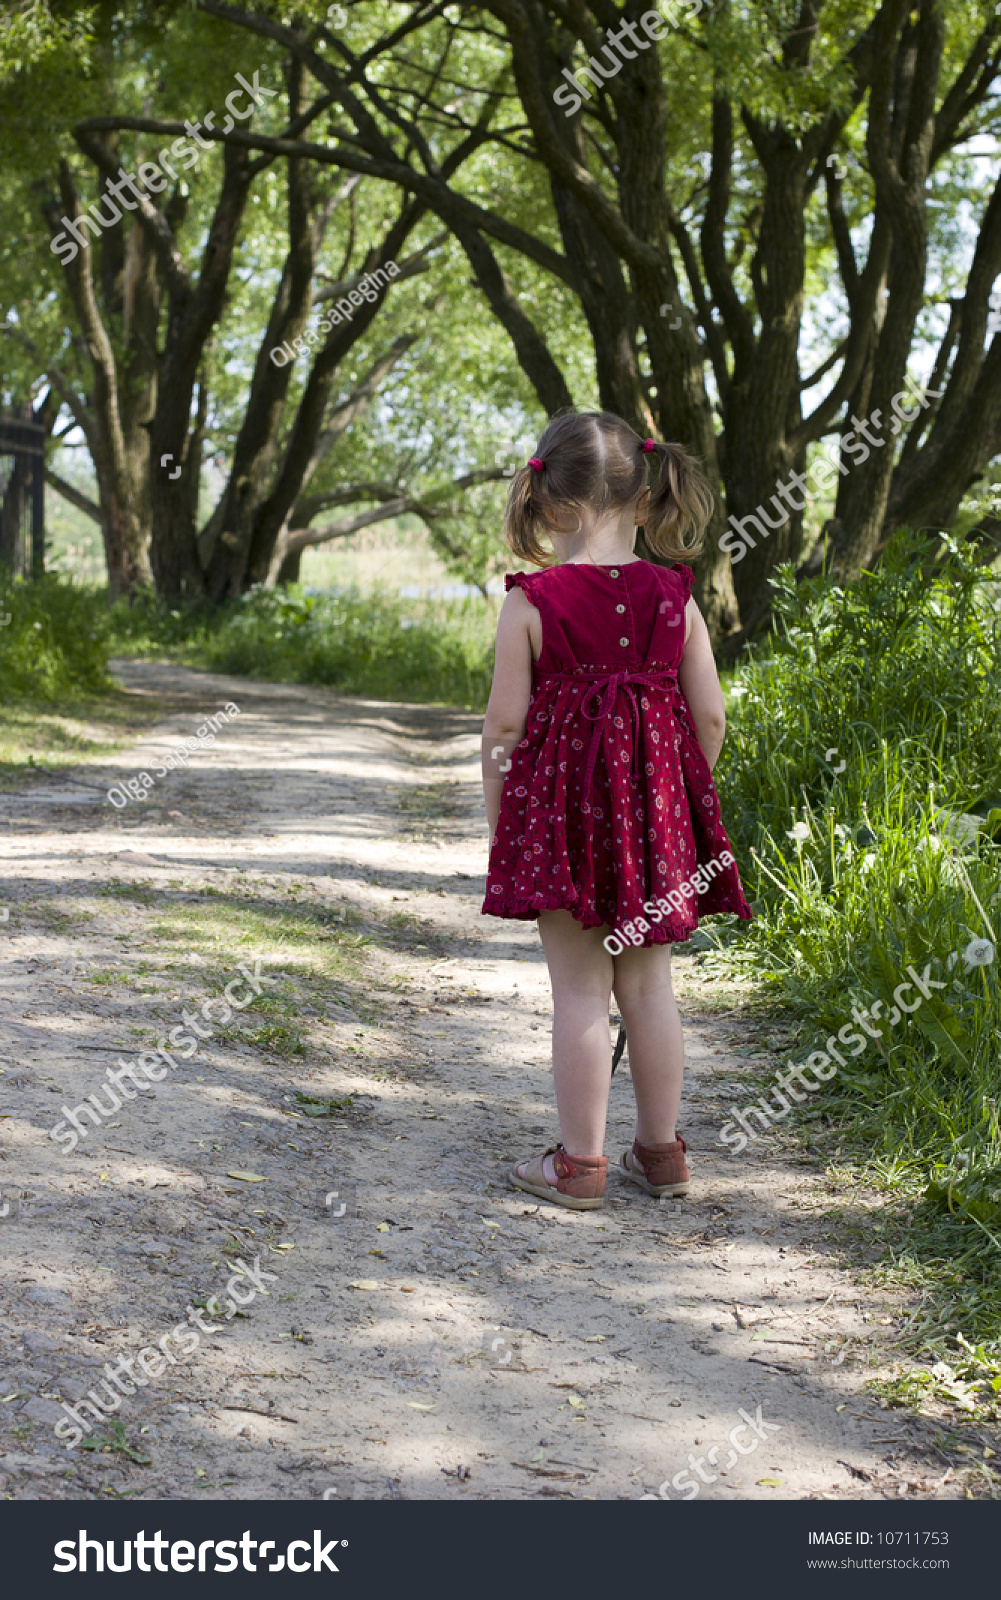 Girl Walking In Country Side Stock Image - Image of dress 